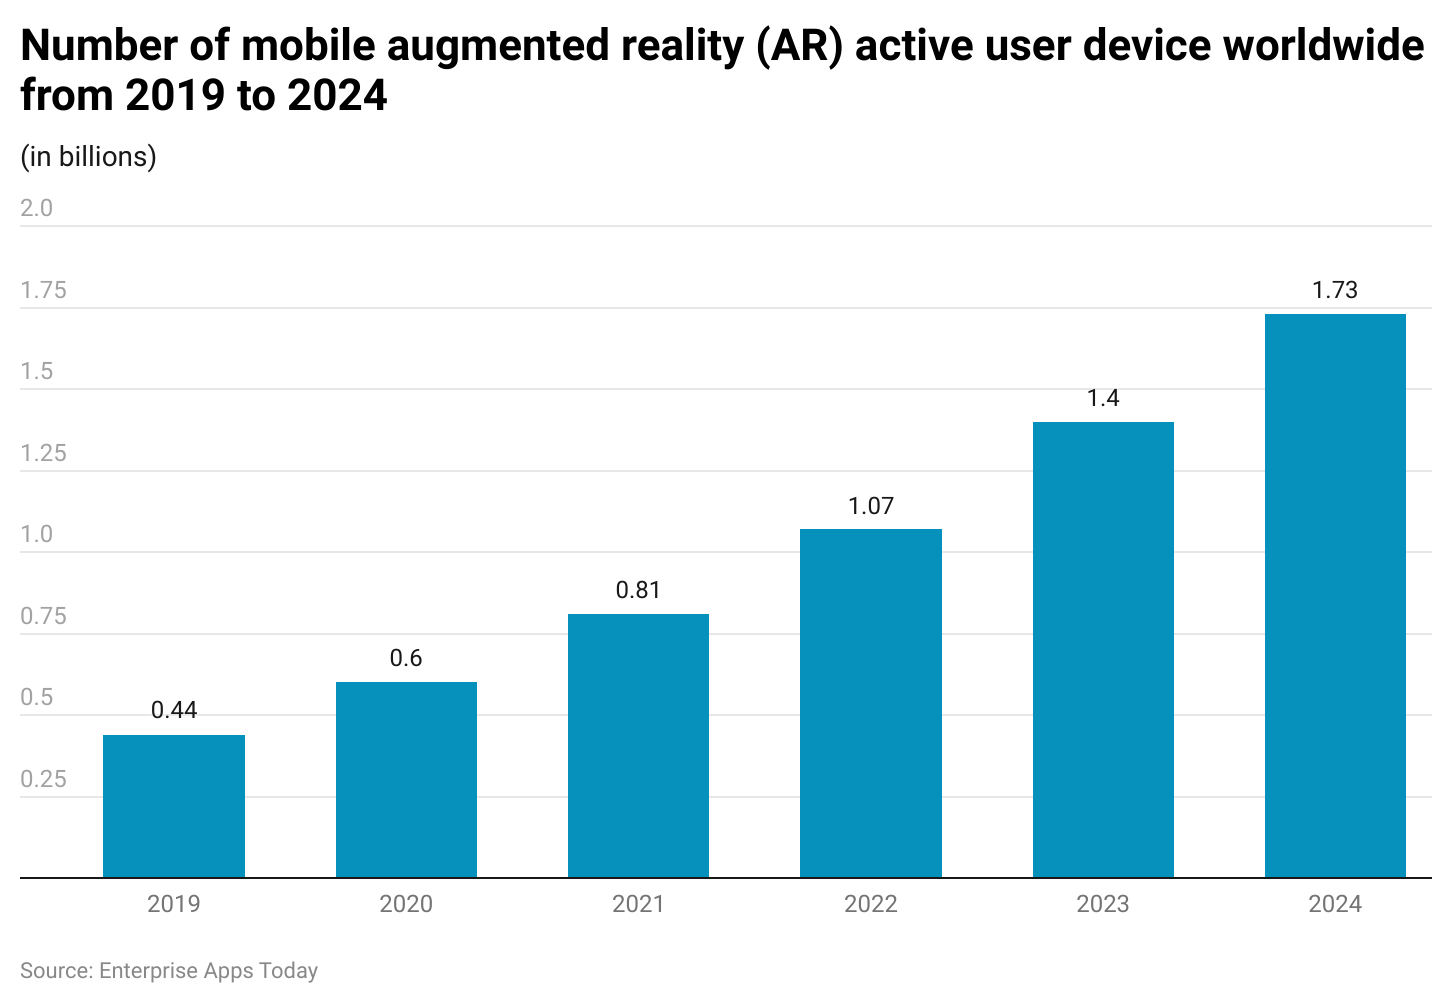 number-of-mobile-augmented-reality-ar-active-user-device-worldwide-from-2019-to-2024.